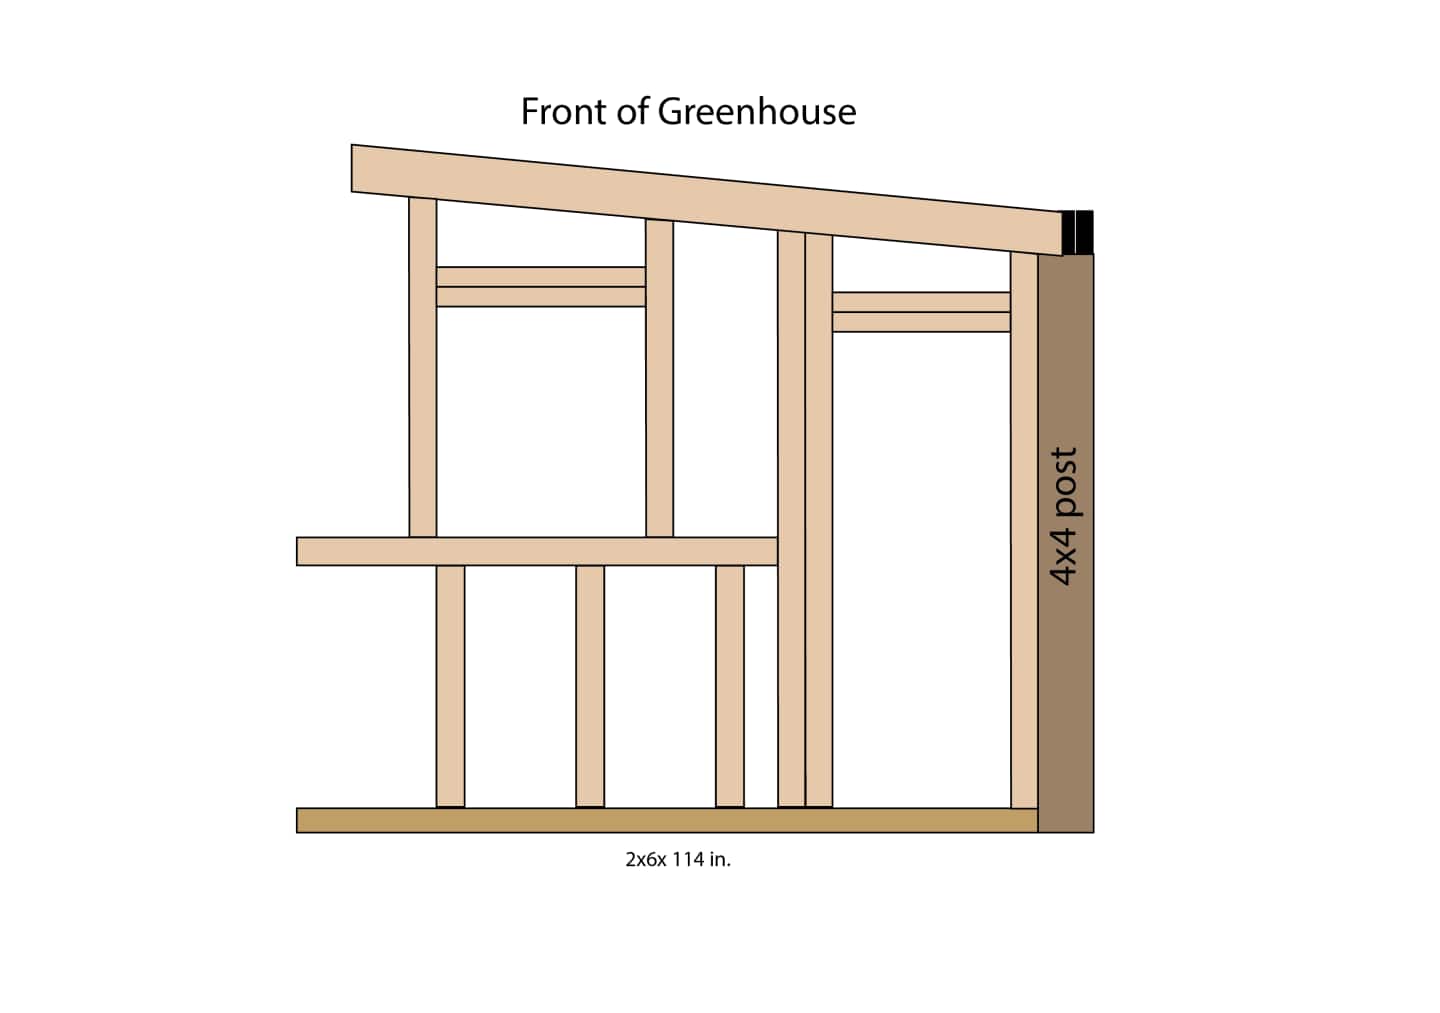 Diagram of the completed front of the greenhouse.